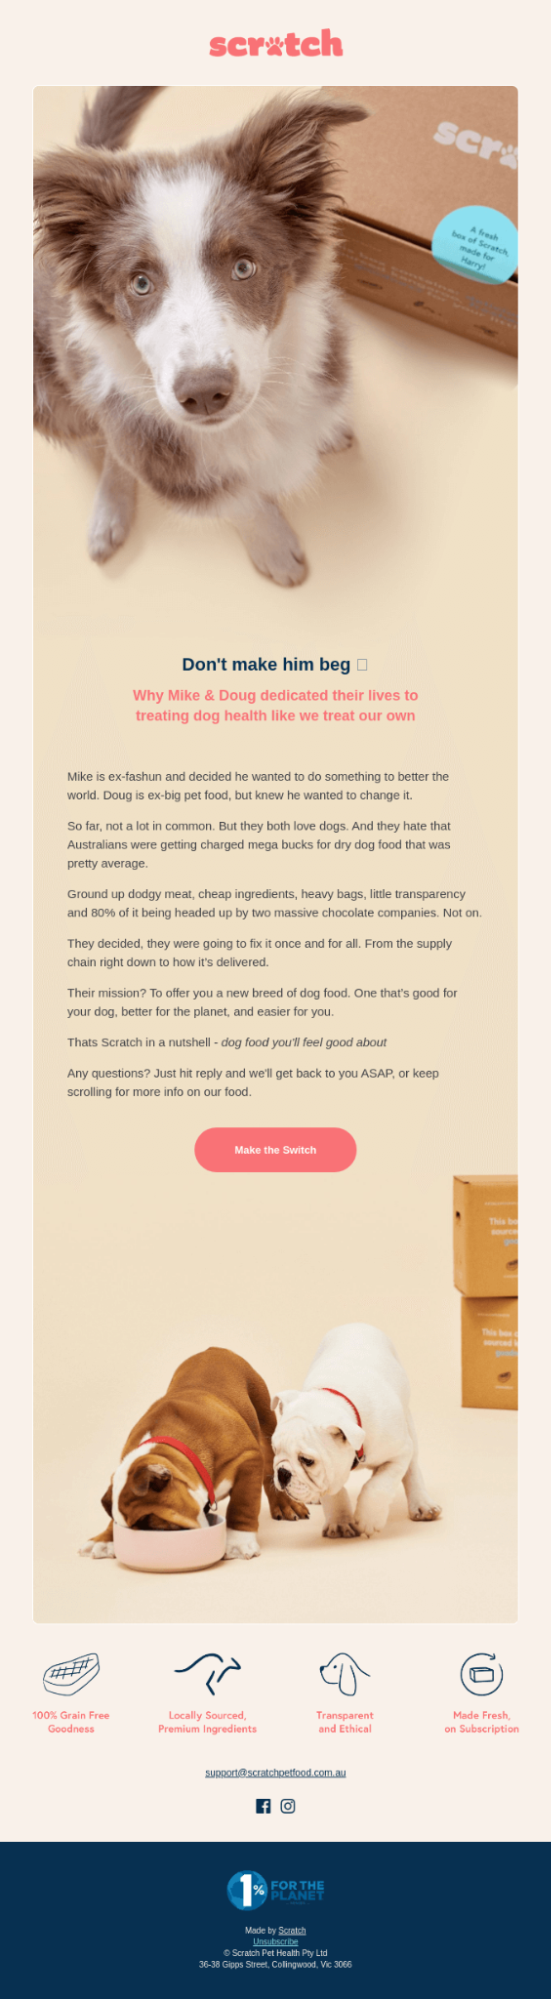 re-engagement email by Scratch